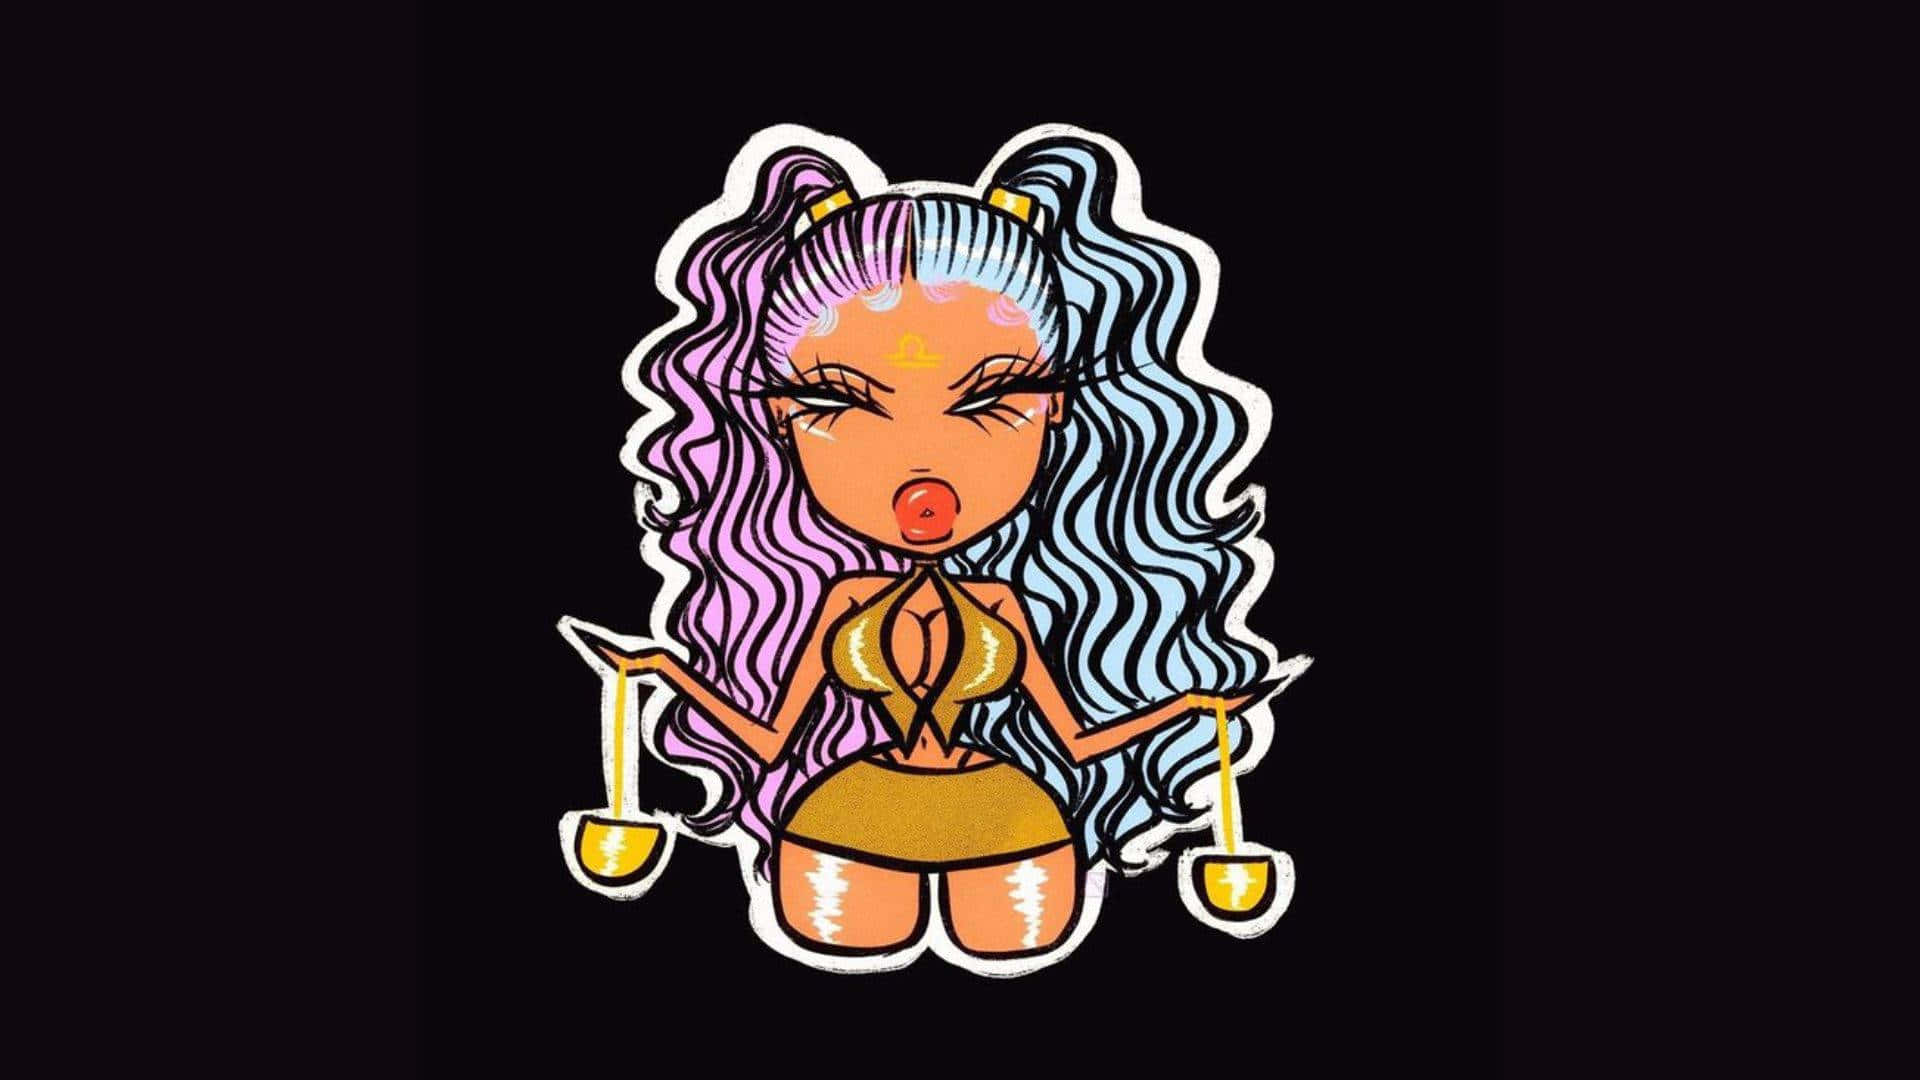 A Sticker With A Girl With Long Hair And Blue Hair